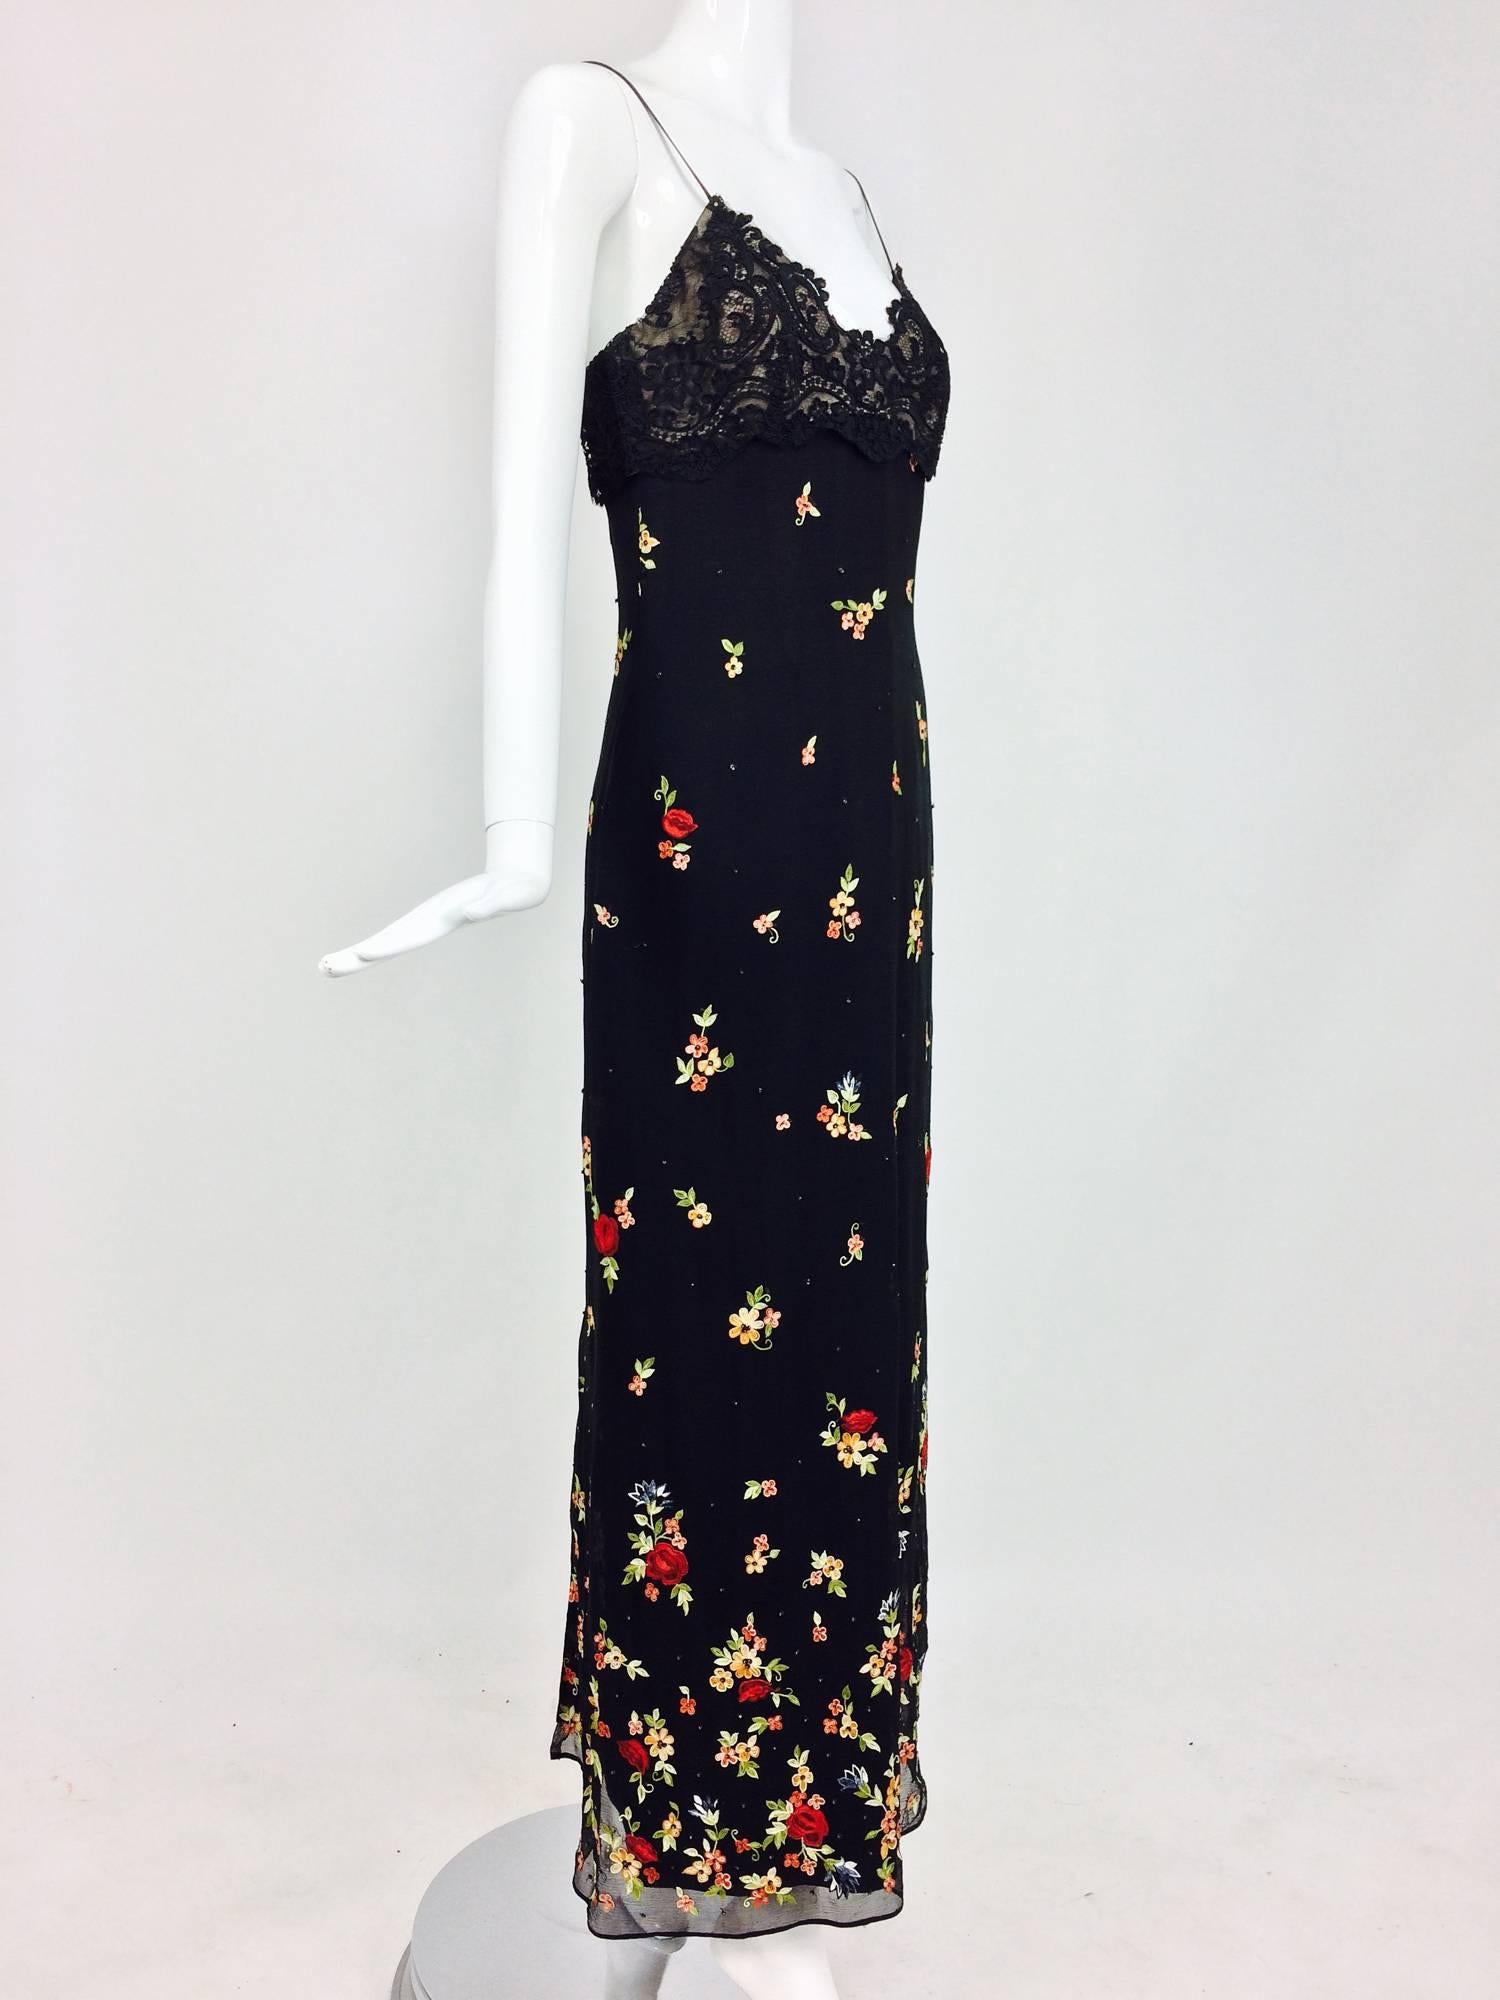 Bellville Sassoon black lace bodice floral silk embroidered chiffon gown 10 2